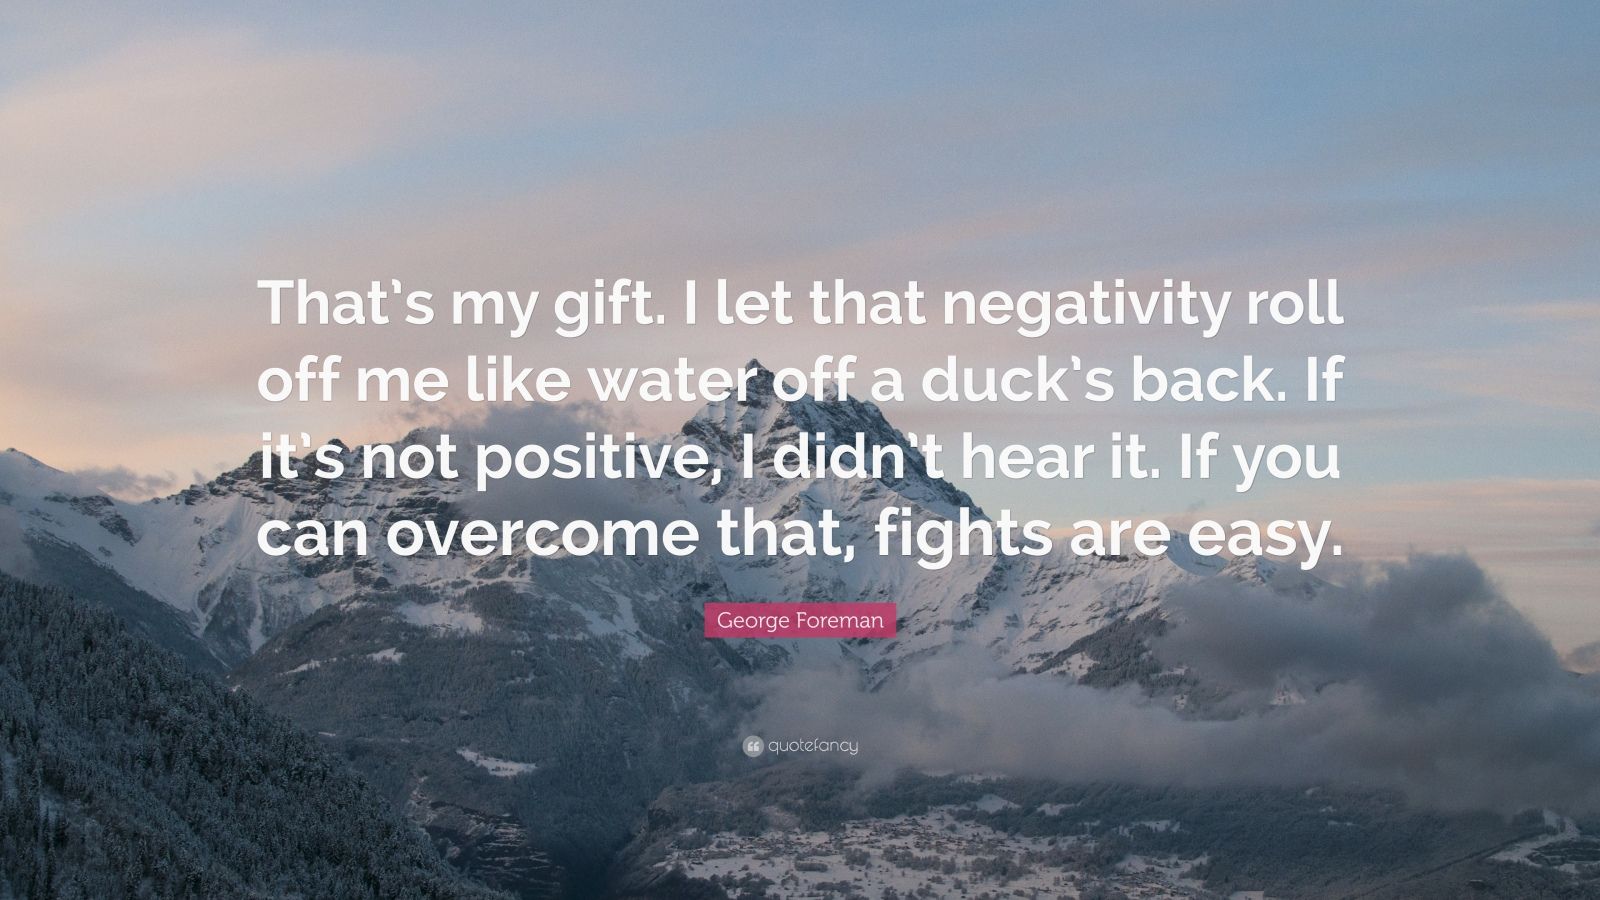 George Foreman Quote: "That's my gift. I let that negativity roll off me like water off a duck's ...